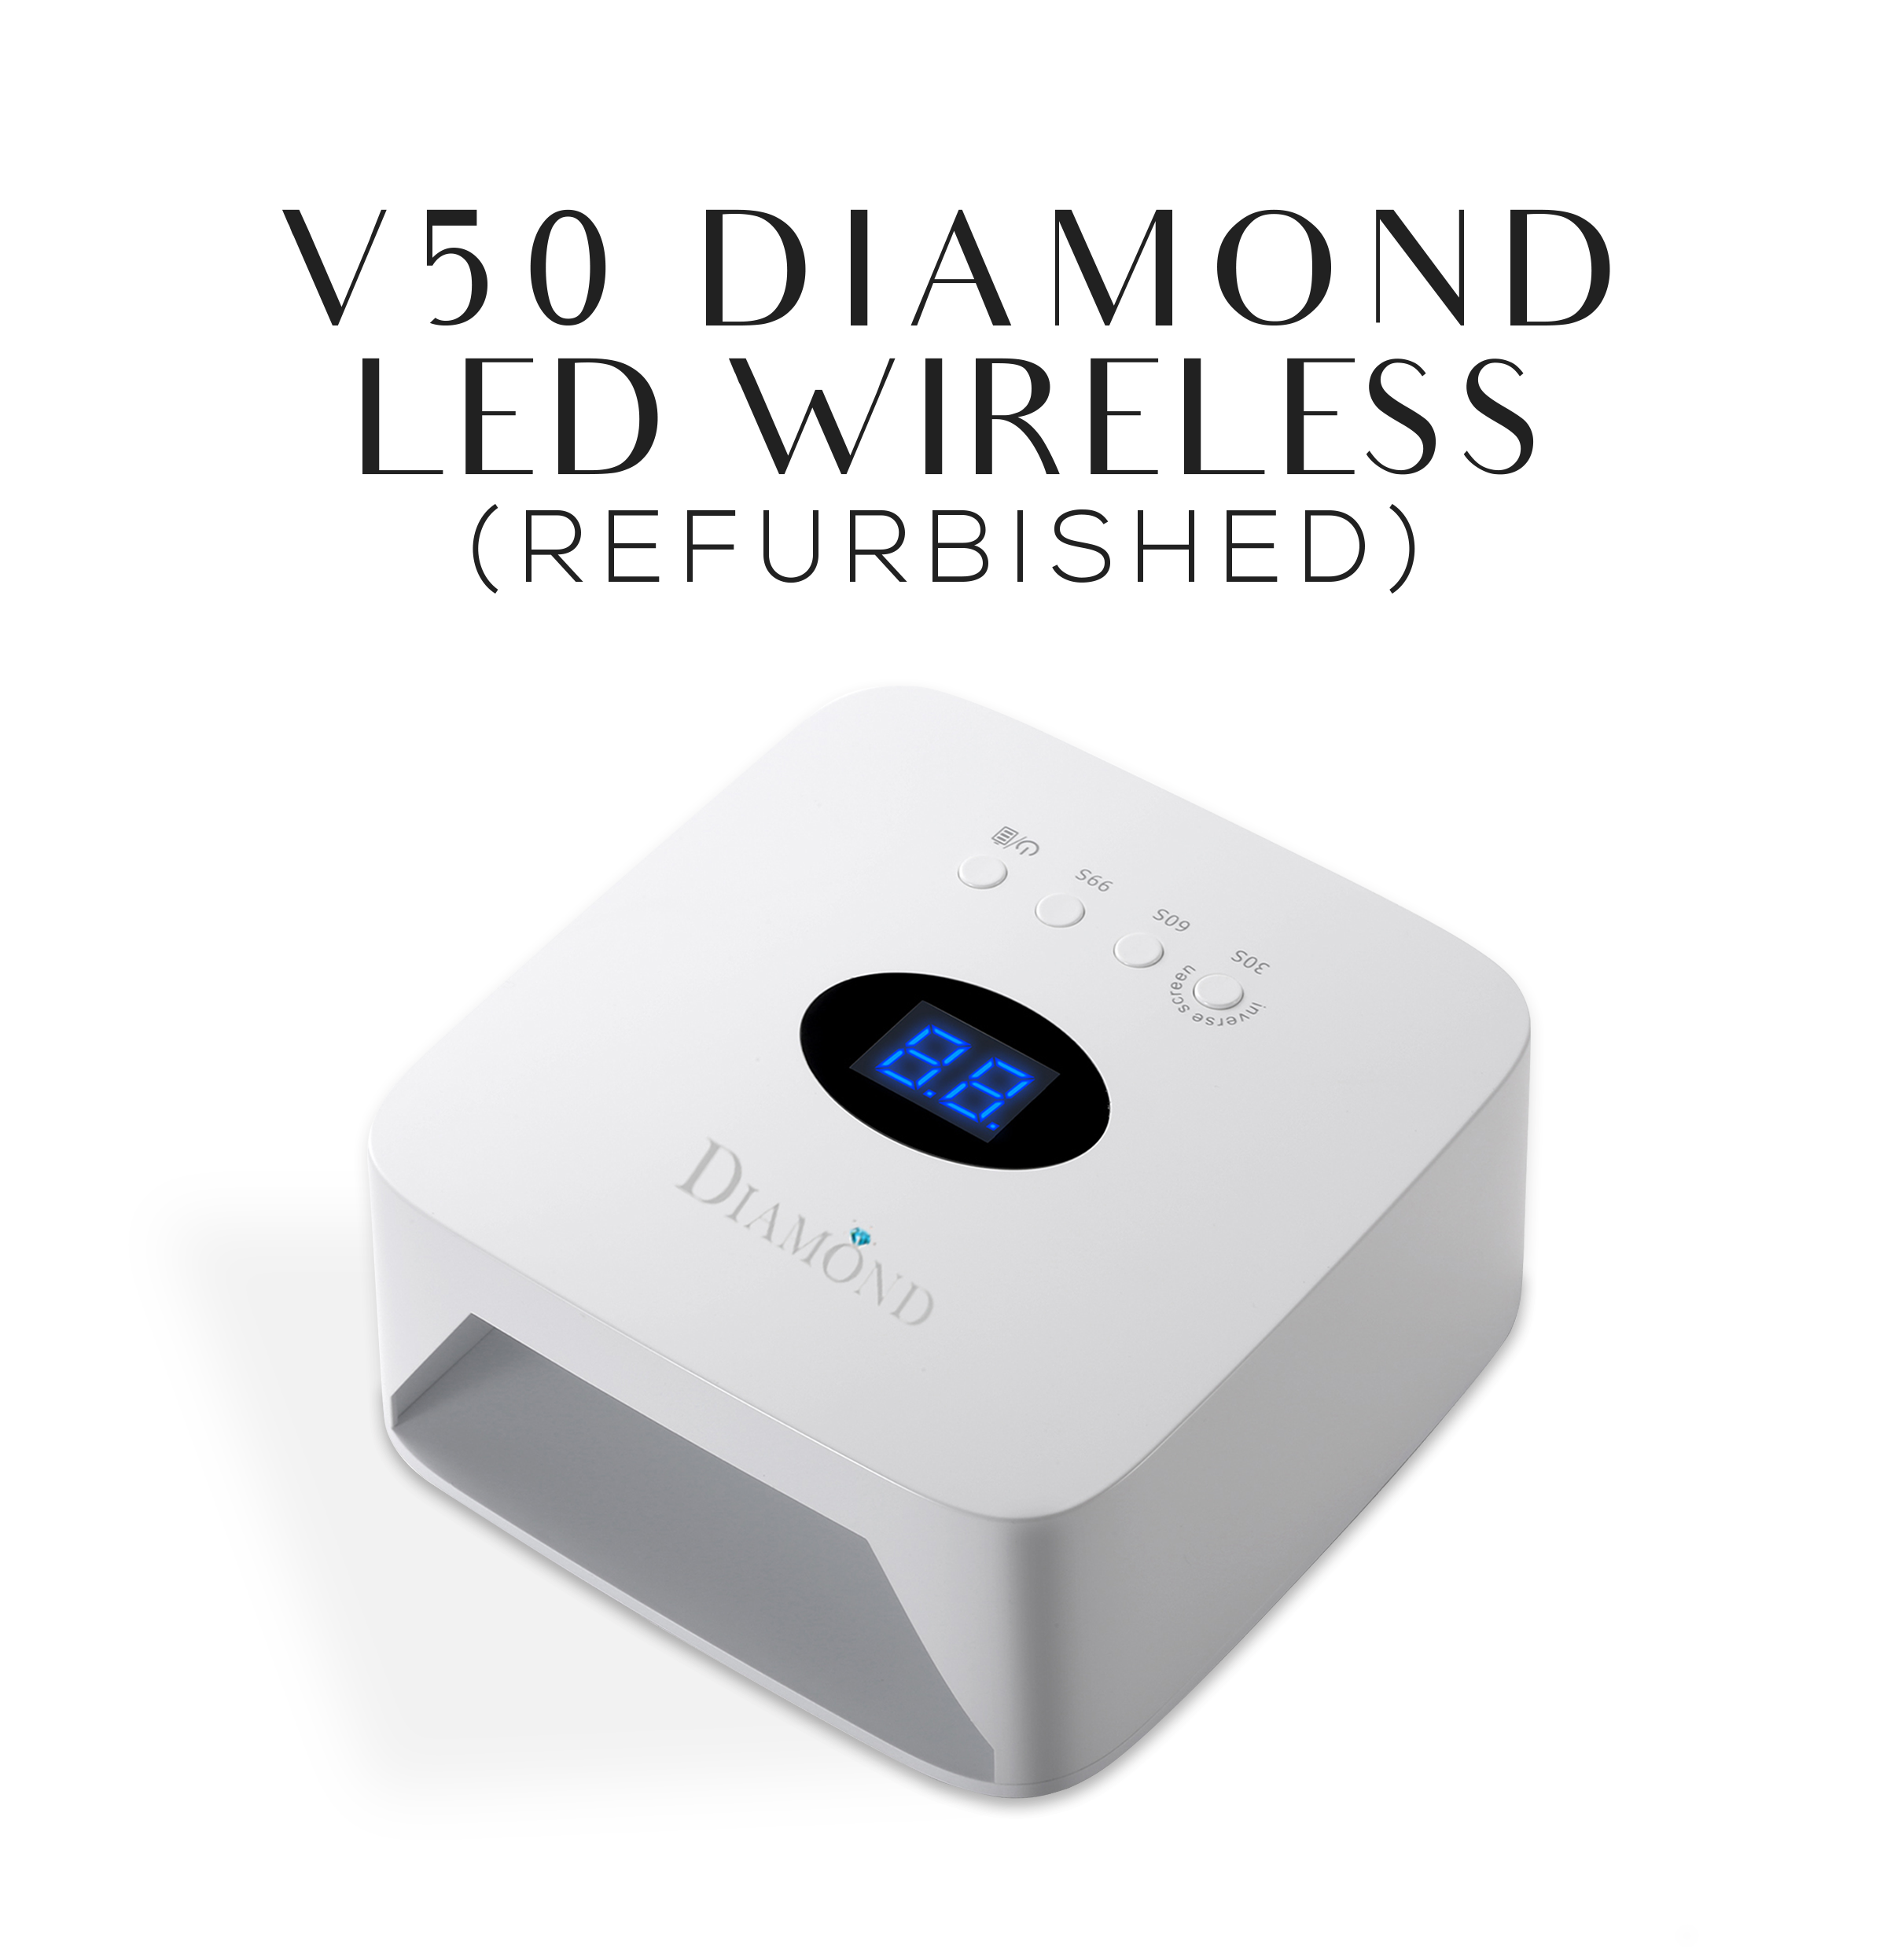 REFURBISHED - V50 Diamond LED Wireless Rechargeable Lamp